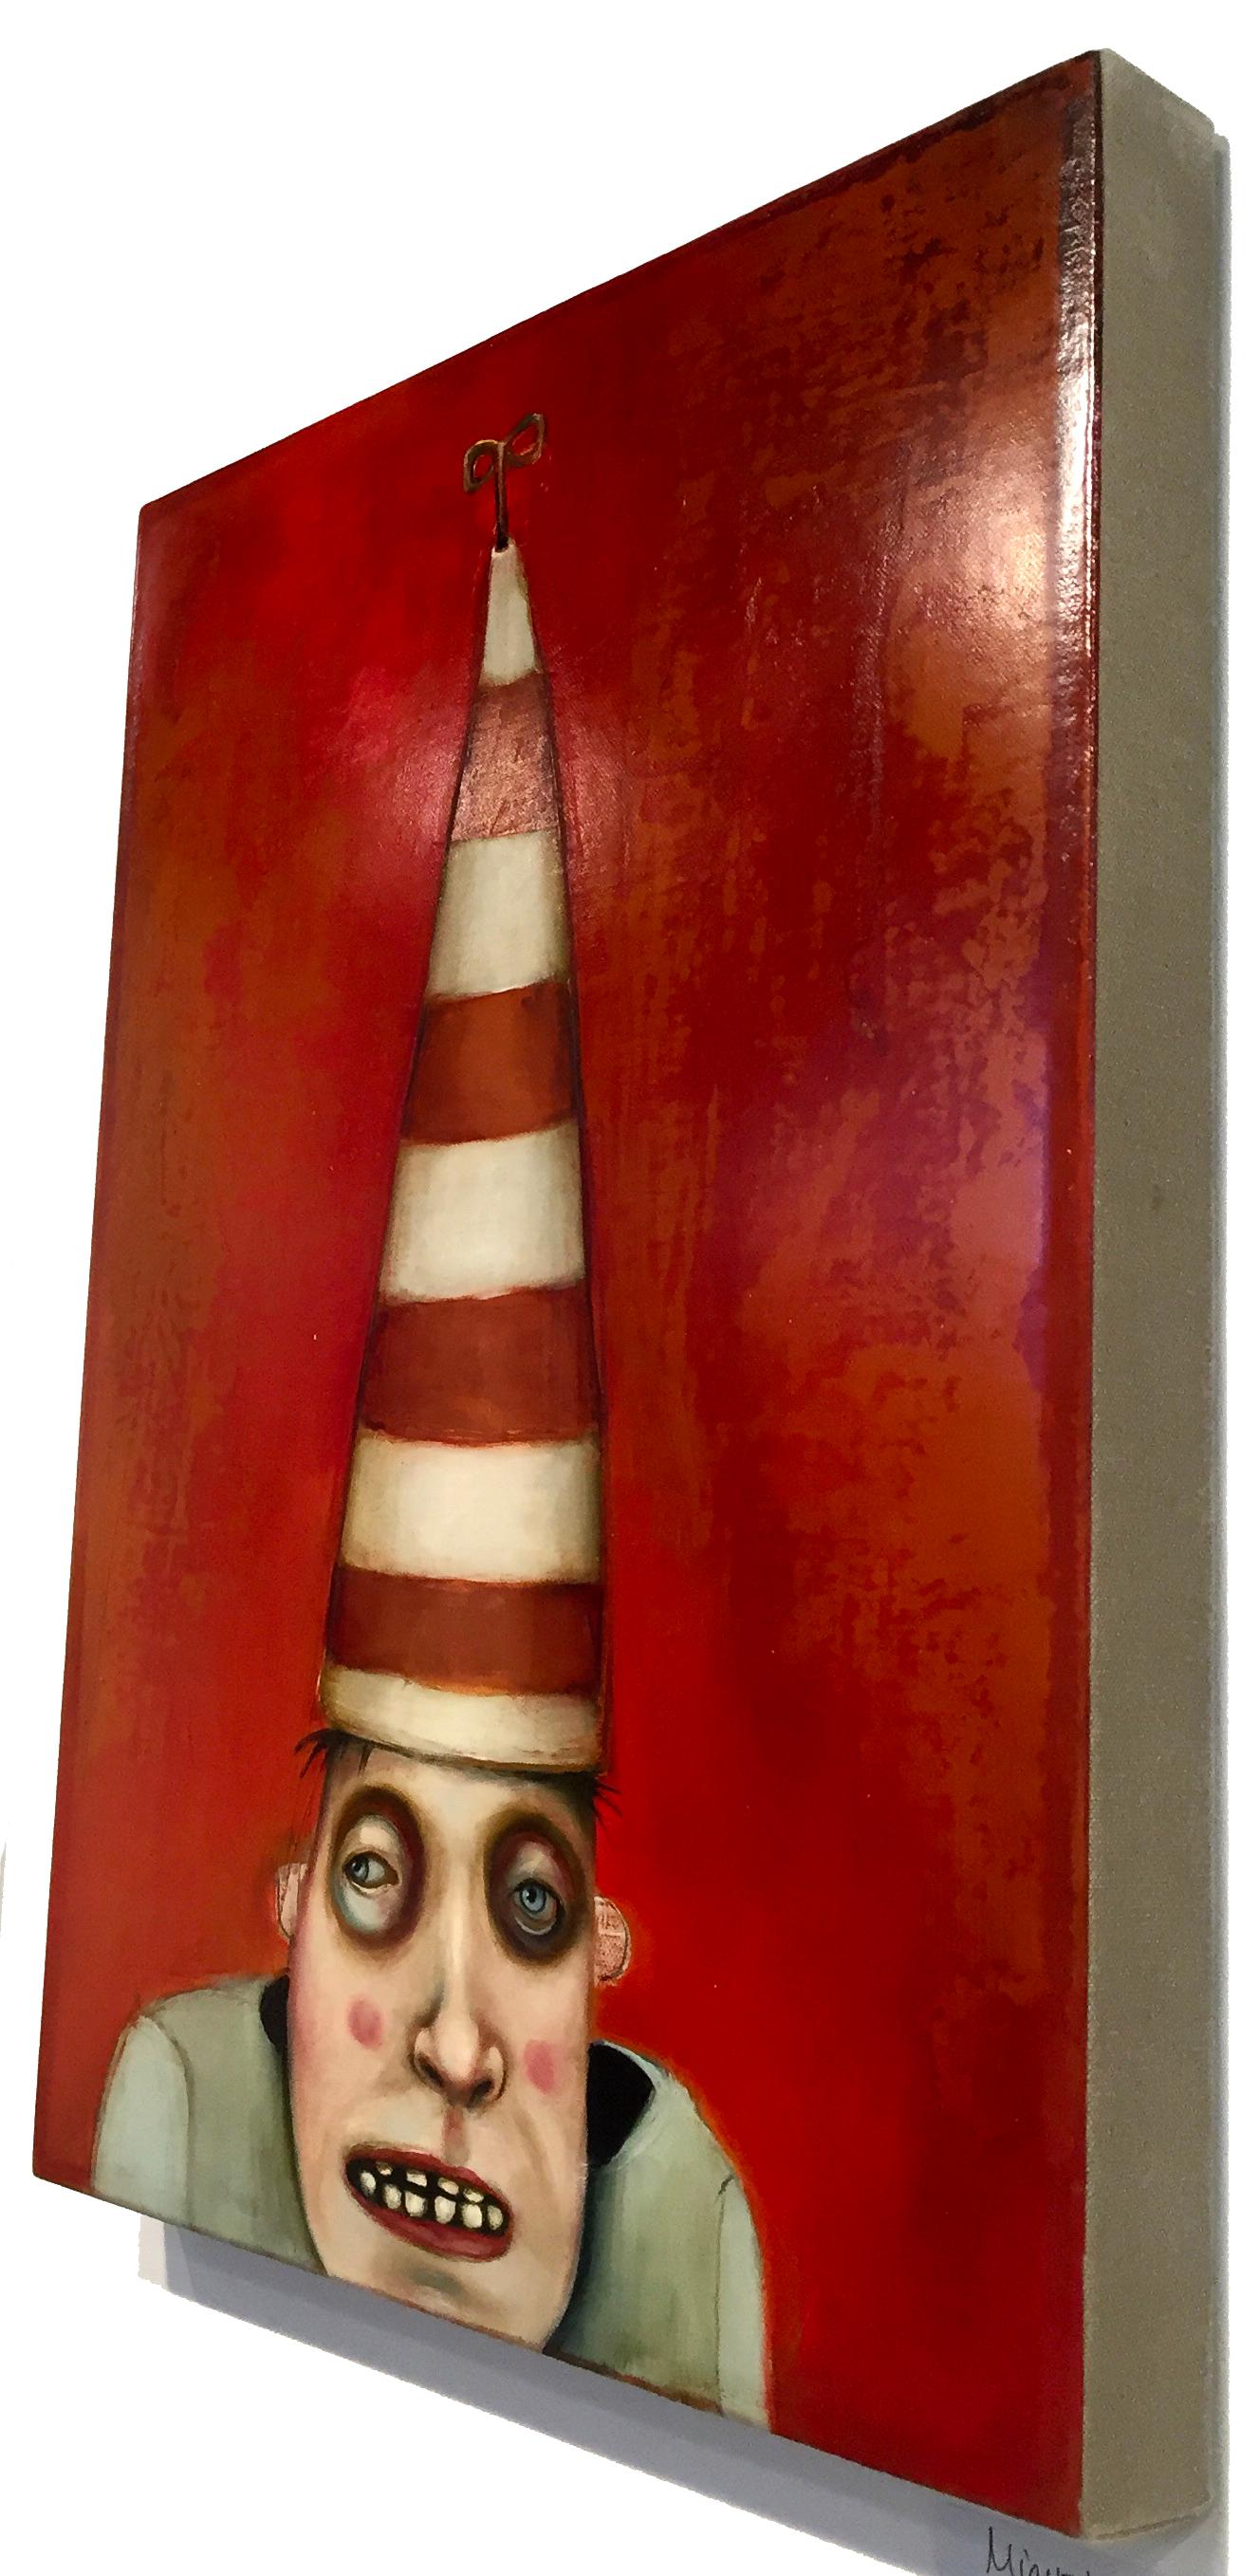 The Lookout by Mikesell, Oil on canvas, red pop figurative whimsical painting 1